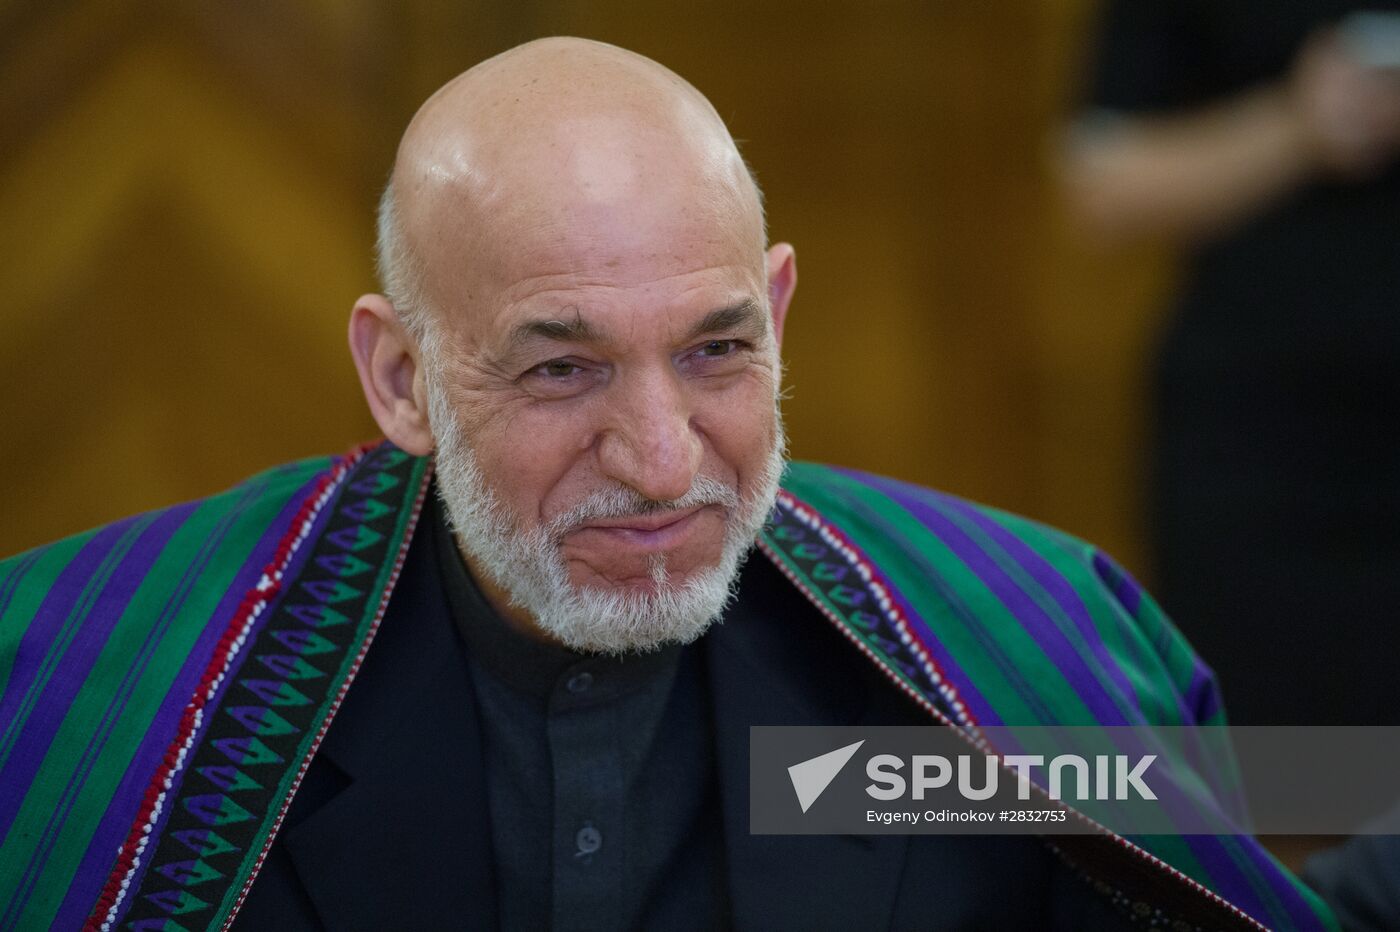 Foreign Minister Sergei Lavrov meets with former President of Afghanistan Hamid Karzai